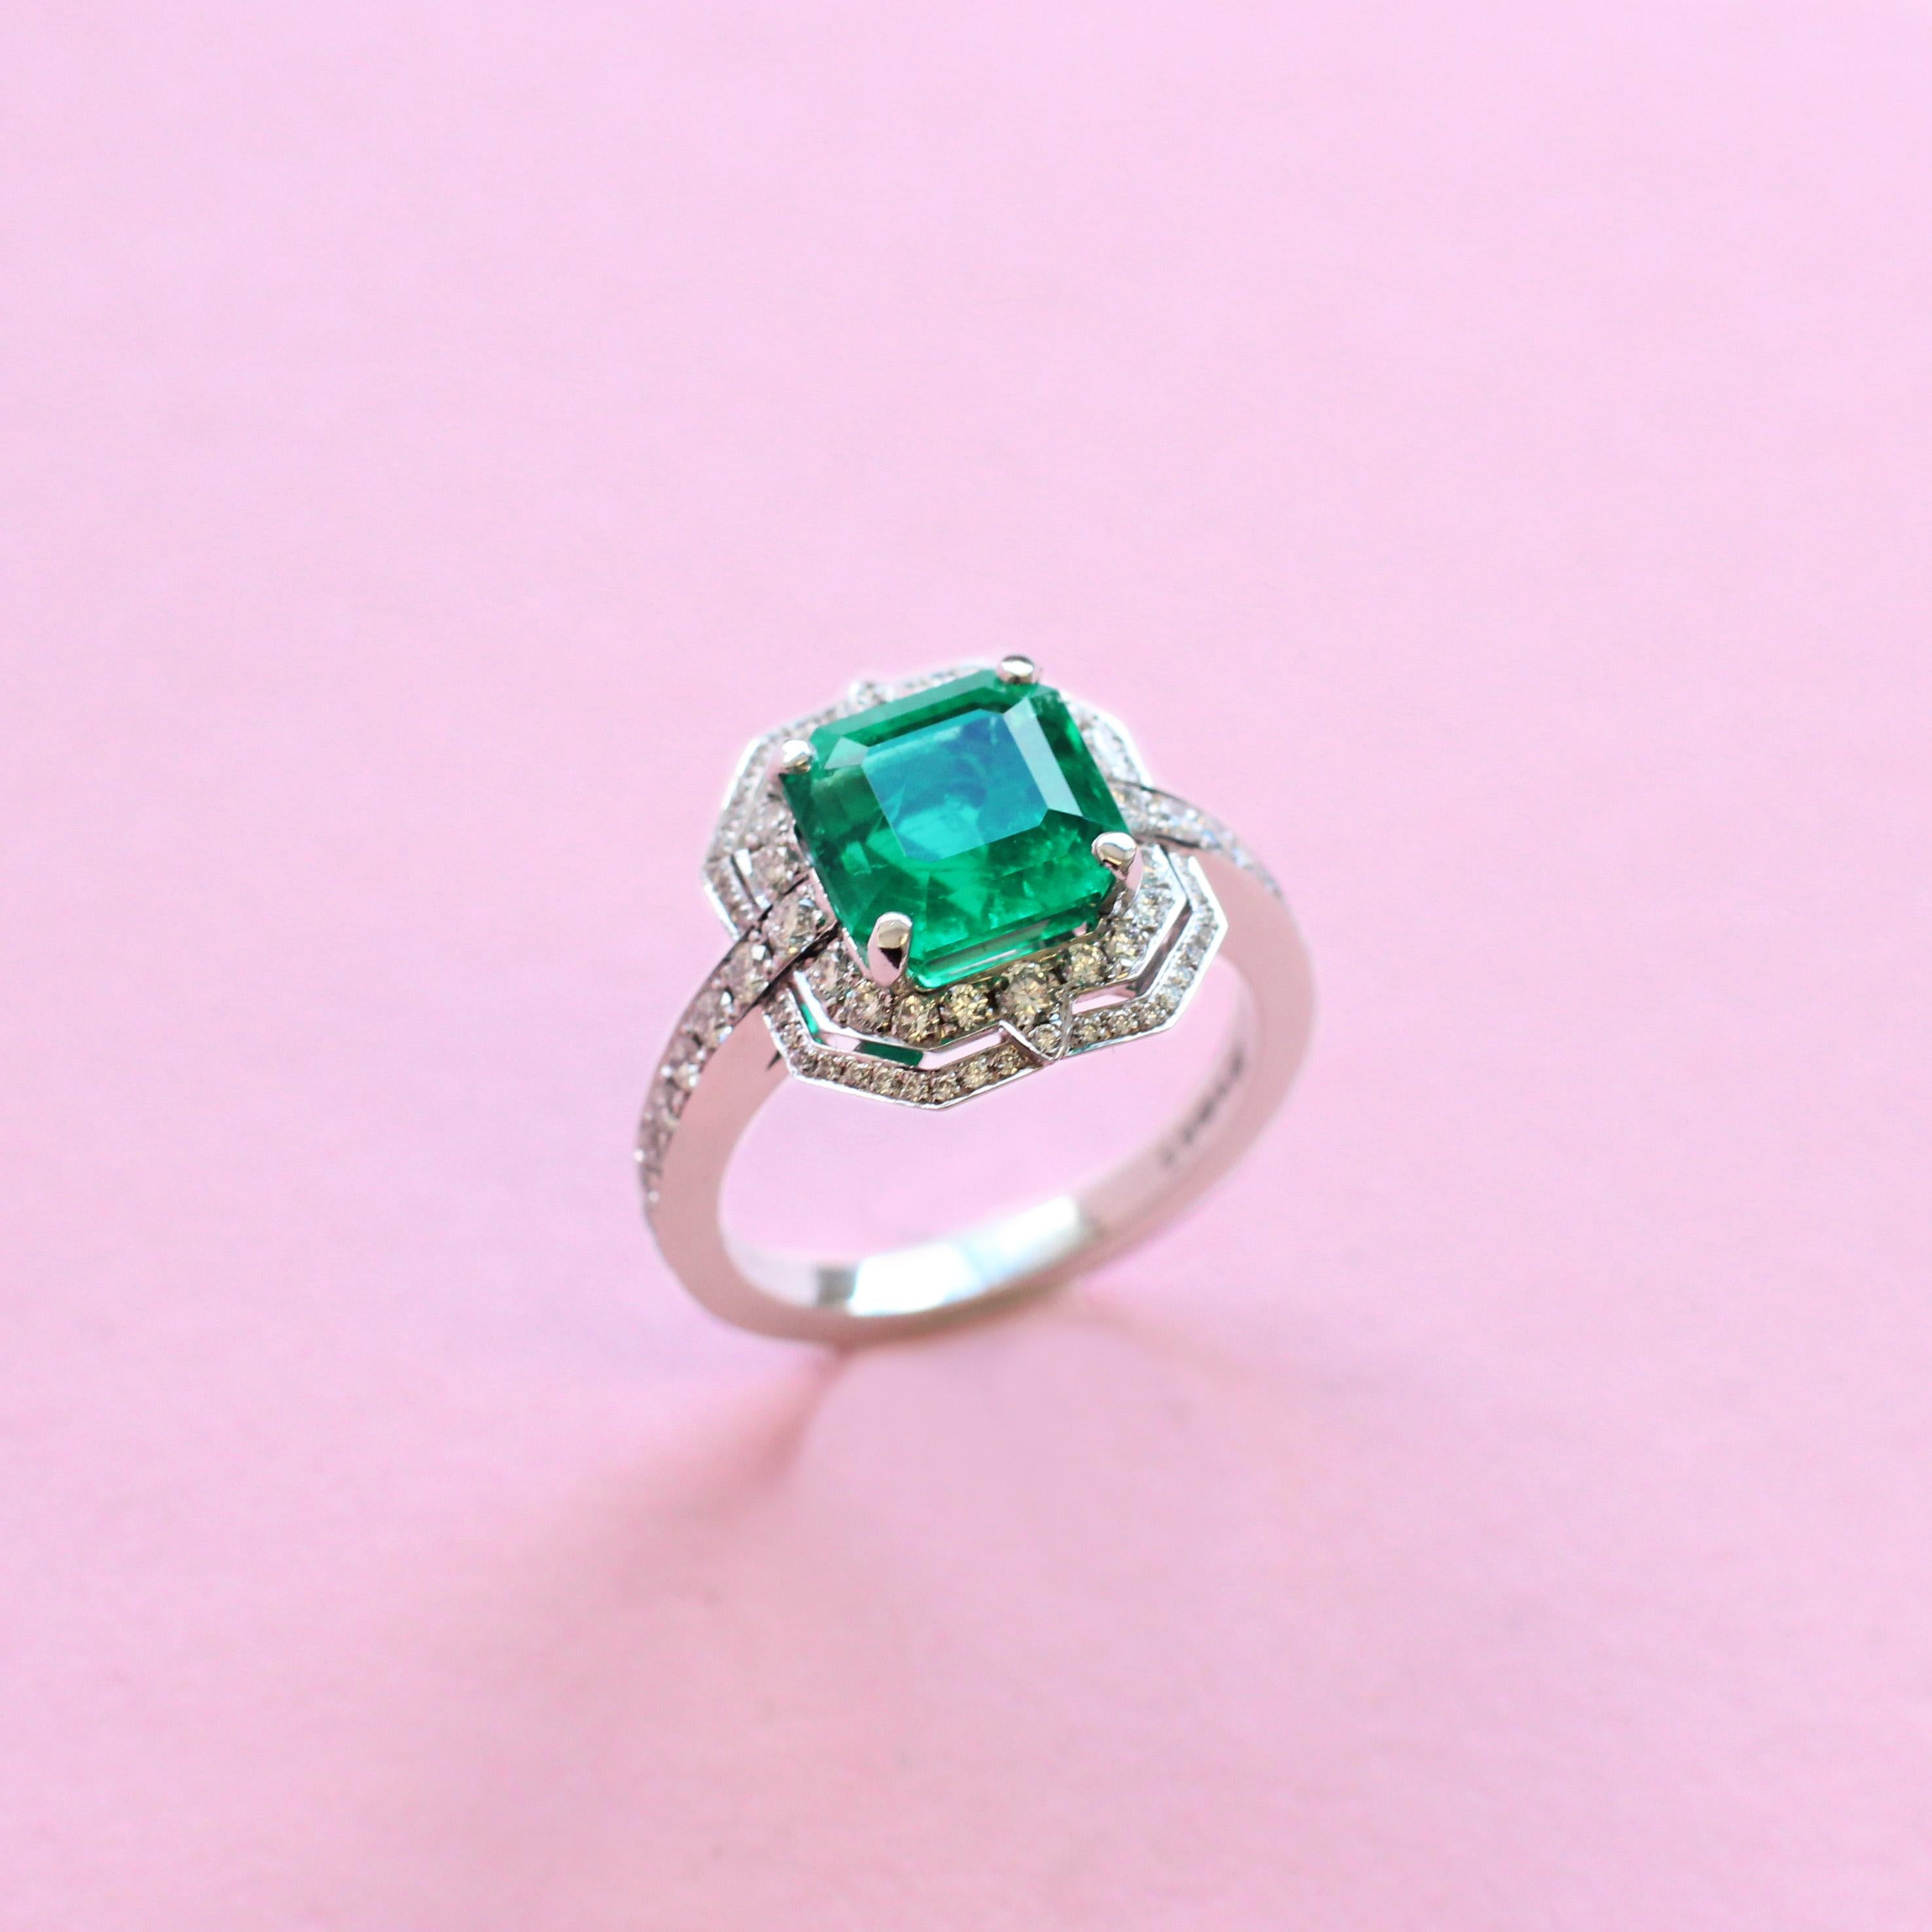 Emerald Cut Certified 3.16 Carats Emerald Ring with White Diamonds Halo in Art Deco Style For Sale